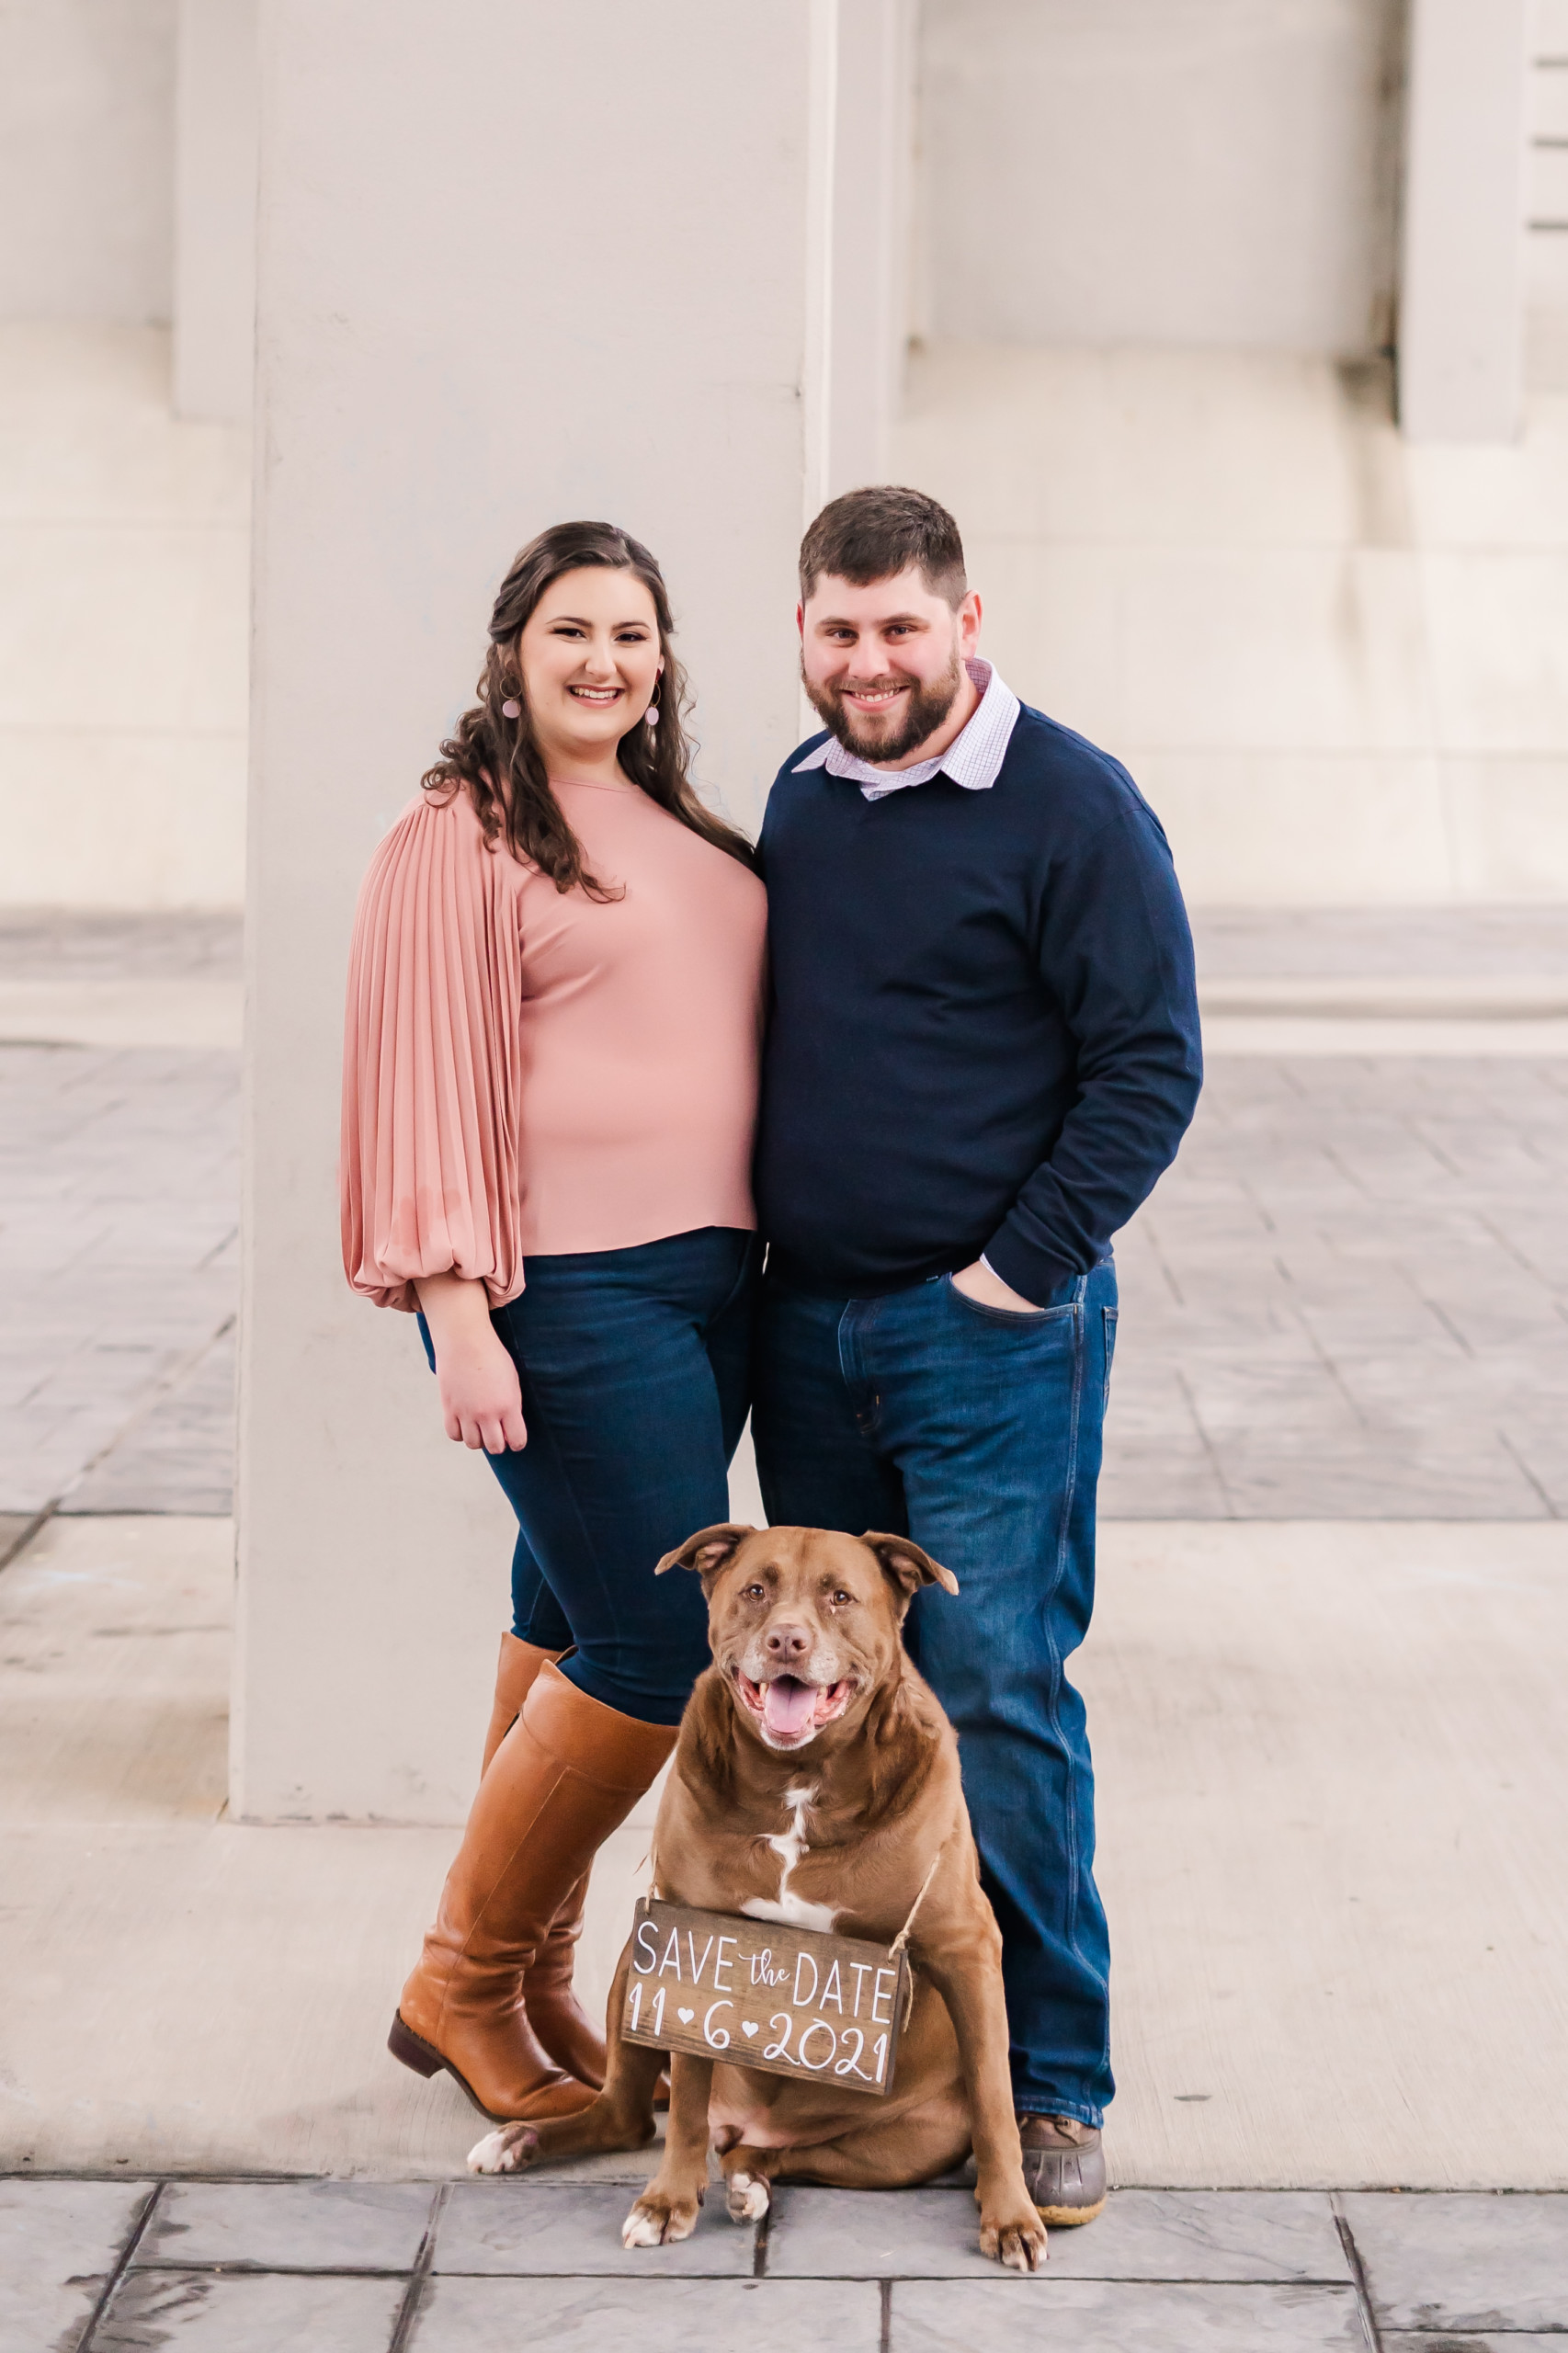 Engagement Pictures and the Pup